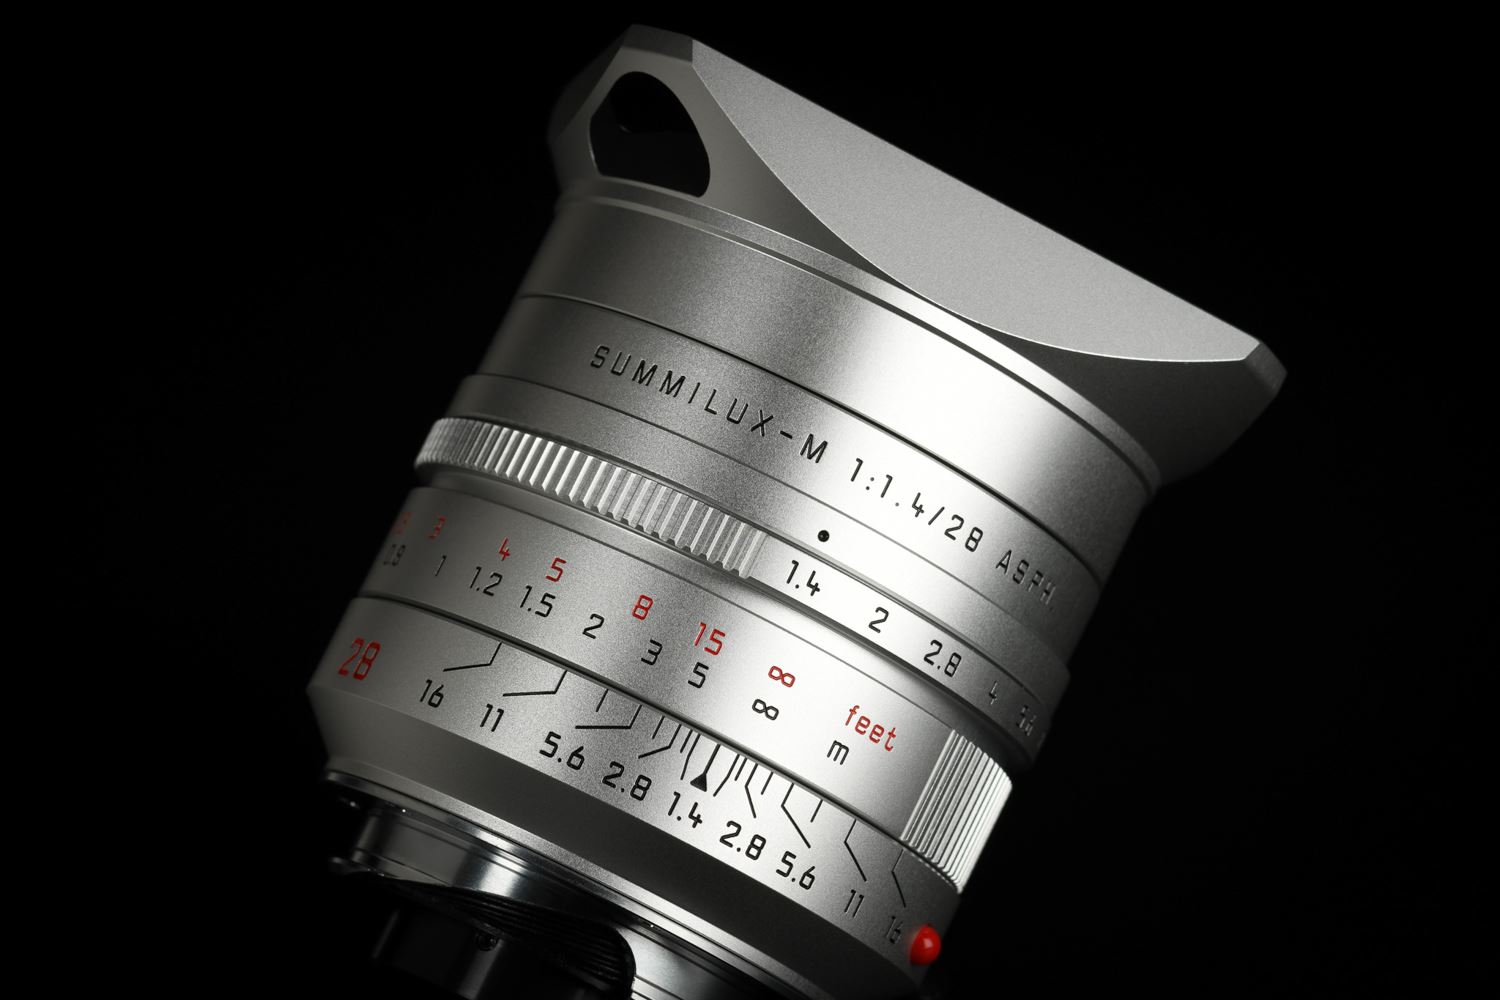 Picture of Summilux-M 28mm f/1.4 ASPH., silver anodized finish